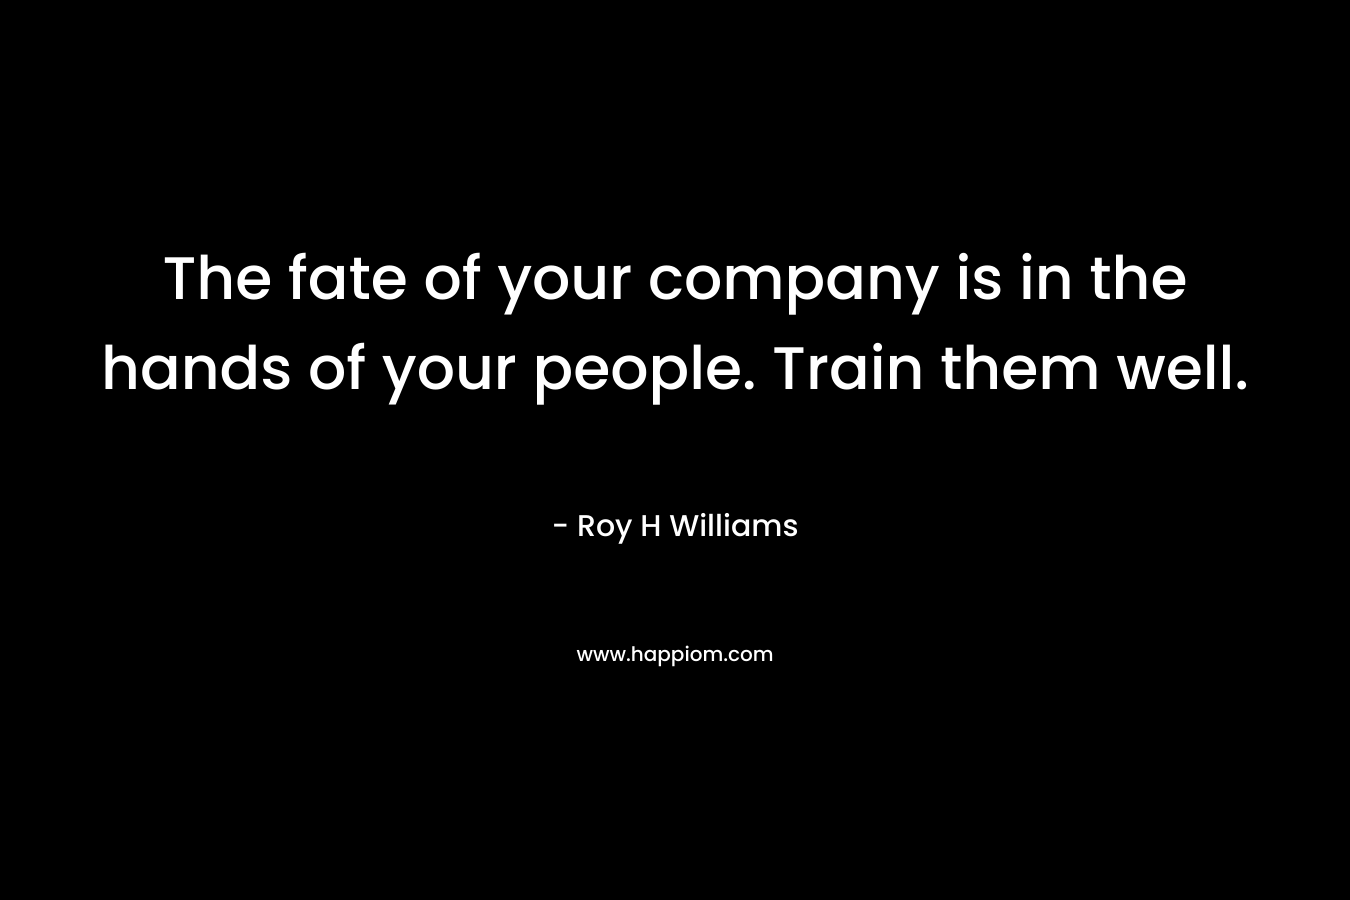 The fate of your company is in the hands of your people. Train them well. – Roy H Williams